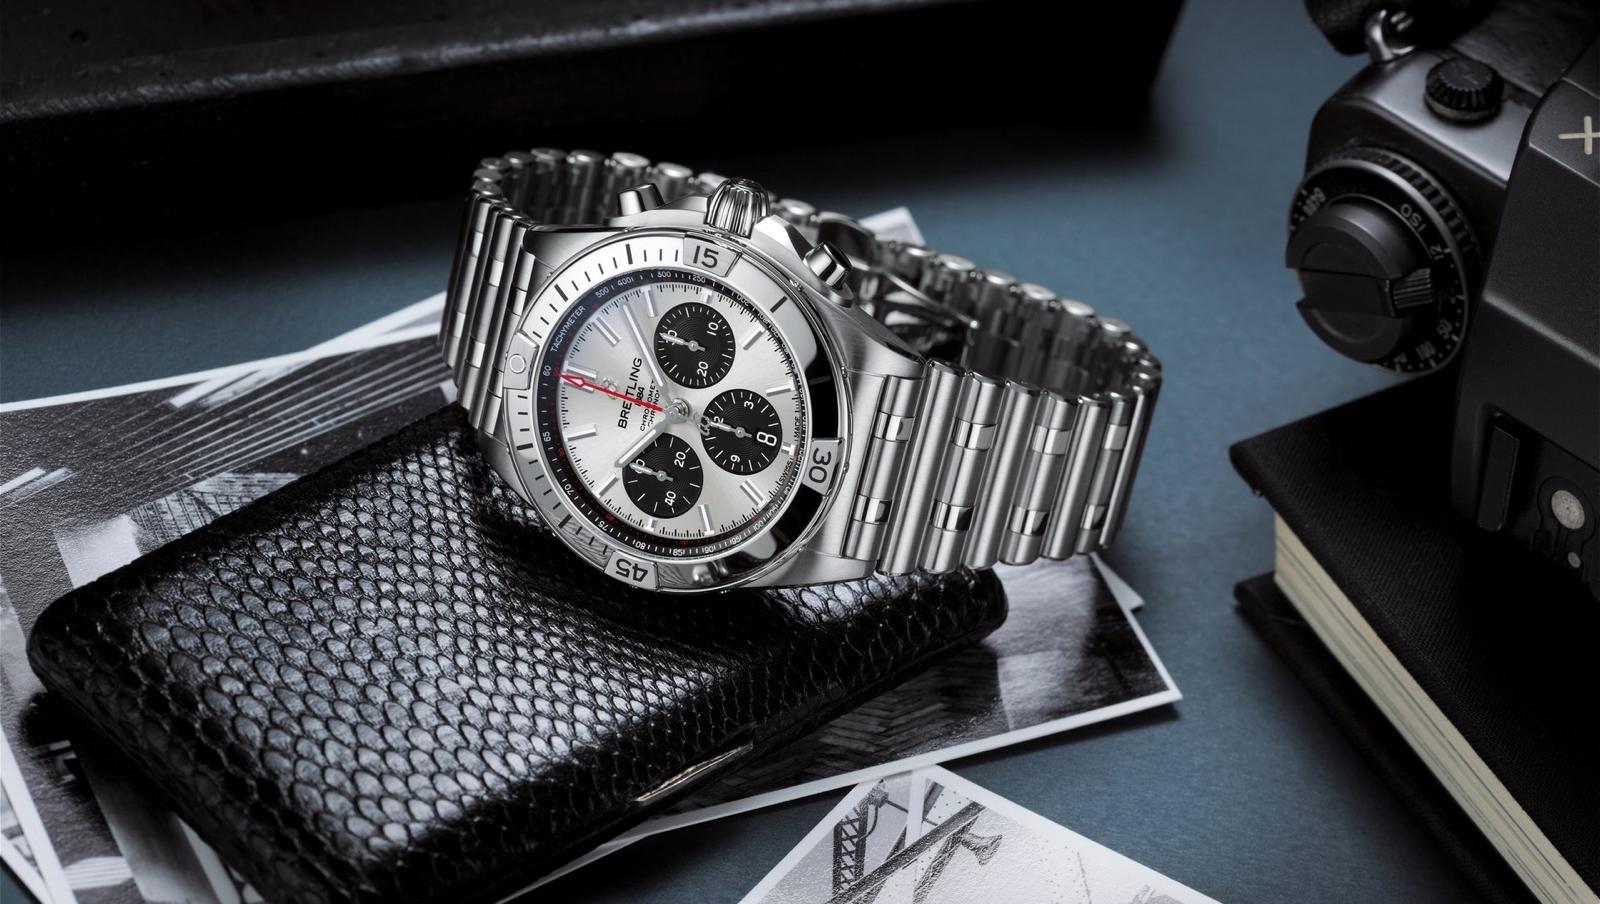 Breitling's 2020 Novelties and a Review of their 2020 Summit Webcast